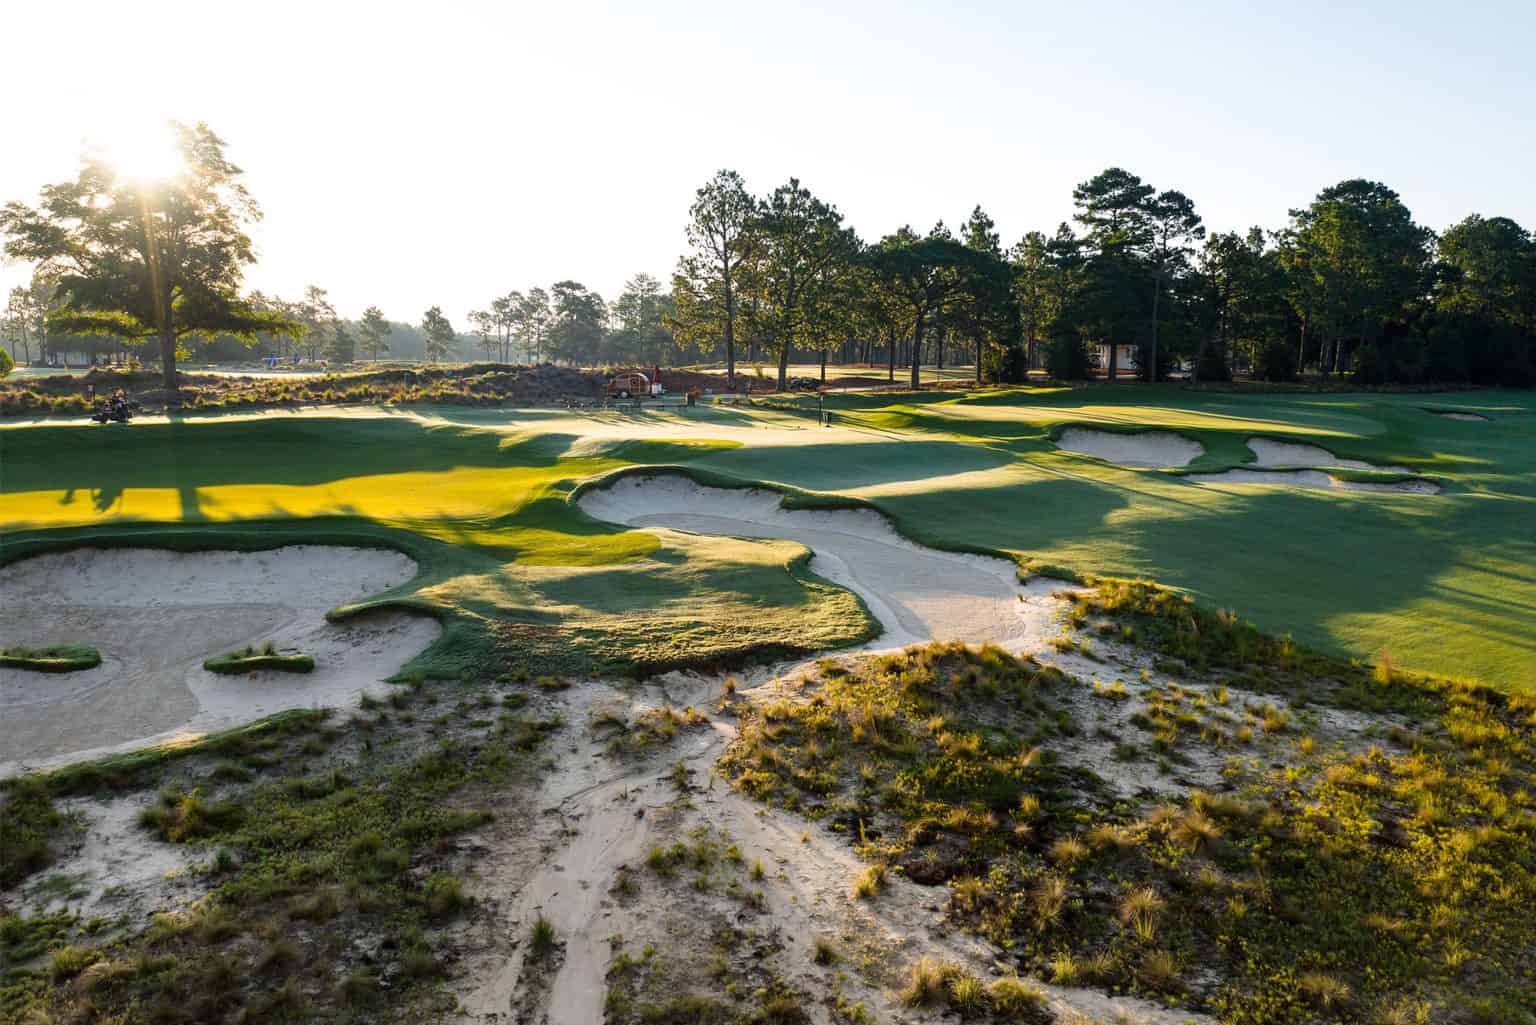 Play The Cradle, our nine-hole short course, which Golf Channel named best in golf design in 2017.